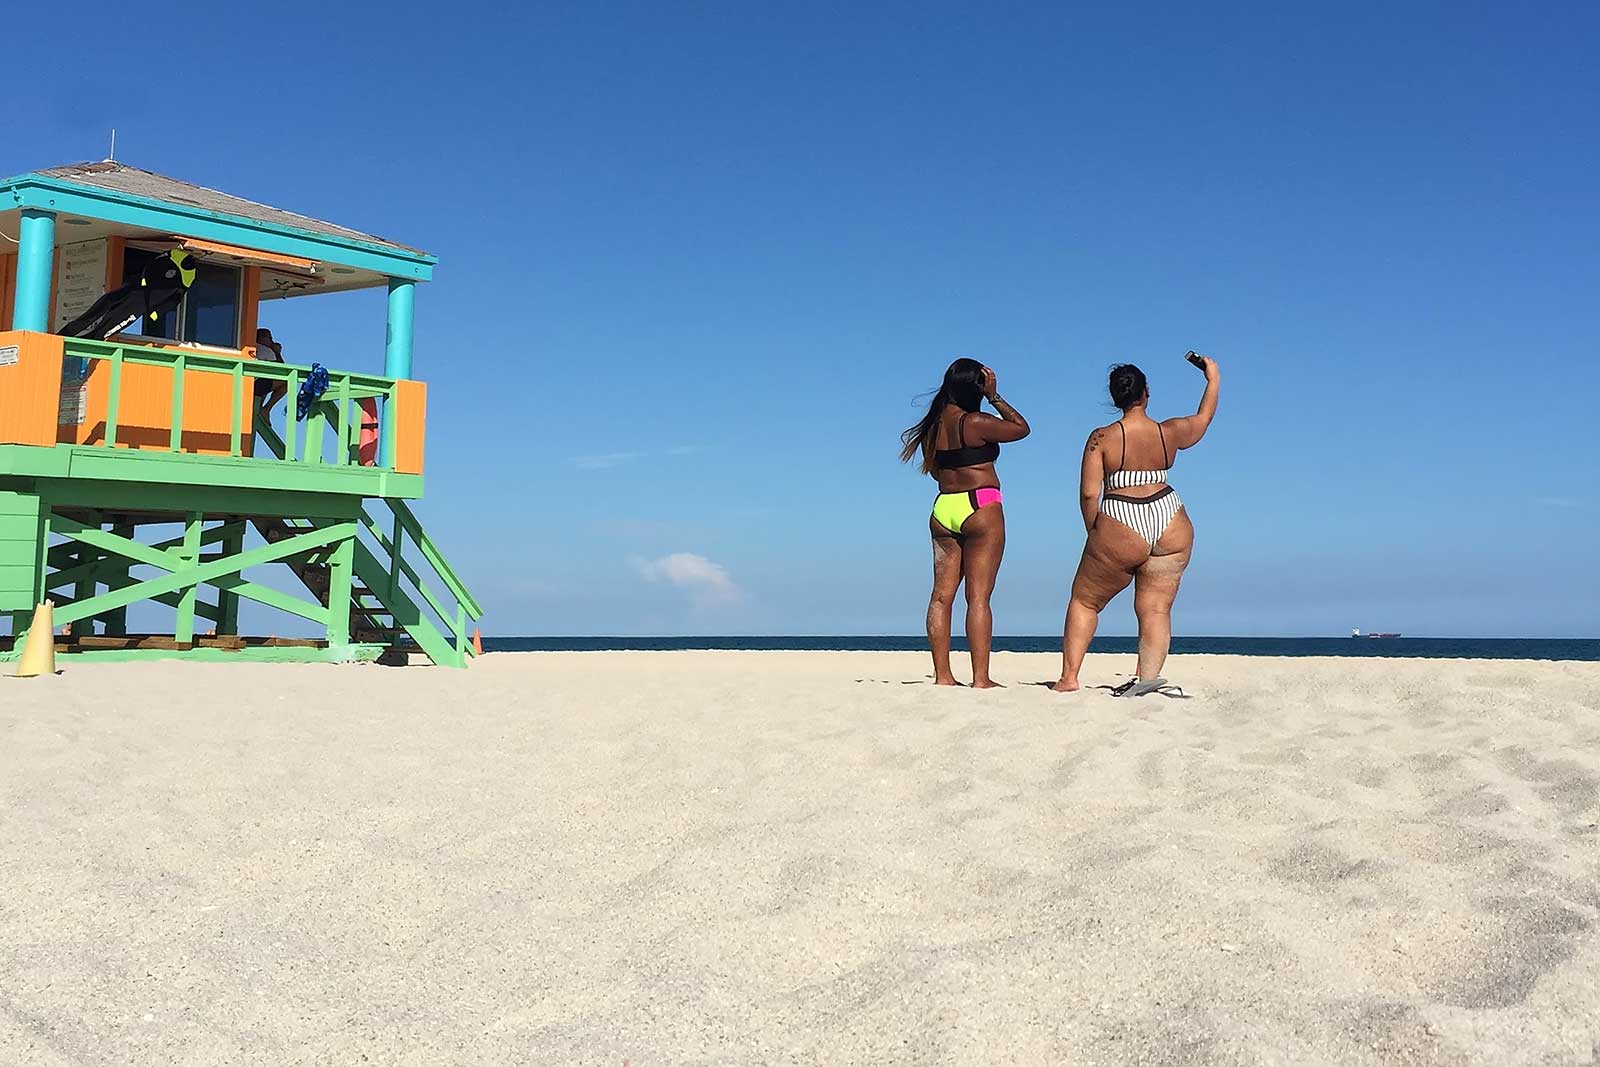 Beautiful people wander along the beaches of Miami, posing and taking selfies...